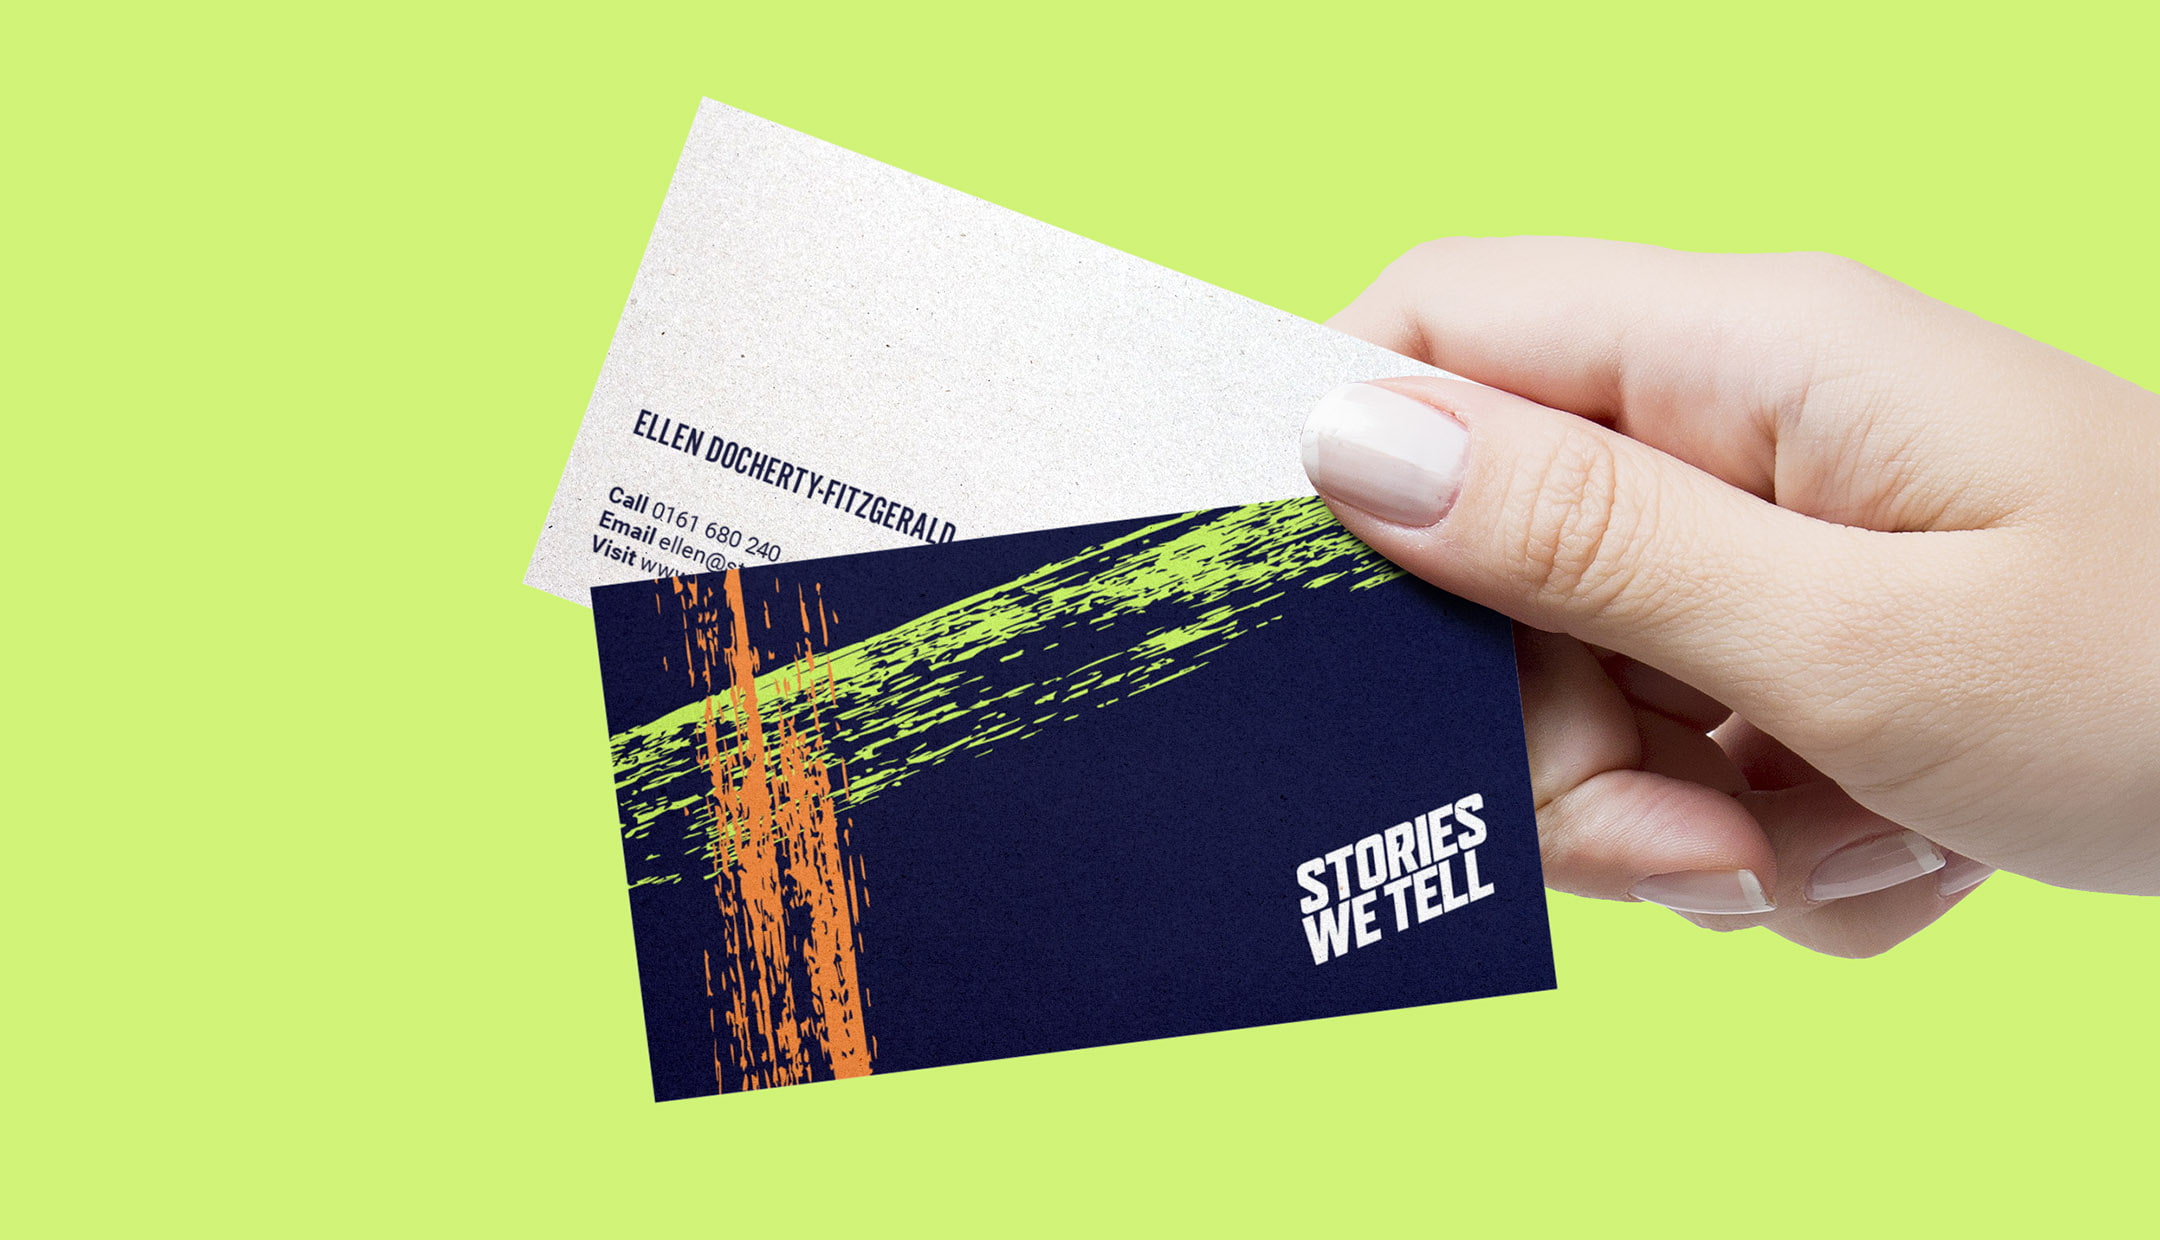 Stories We Tell business cards feature image